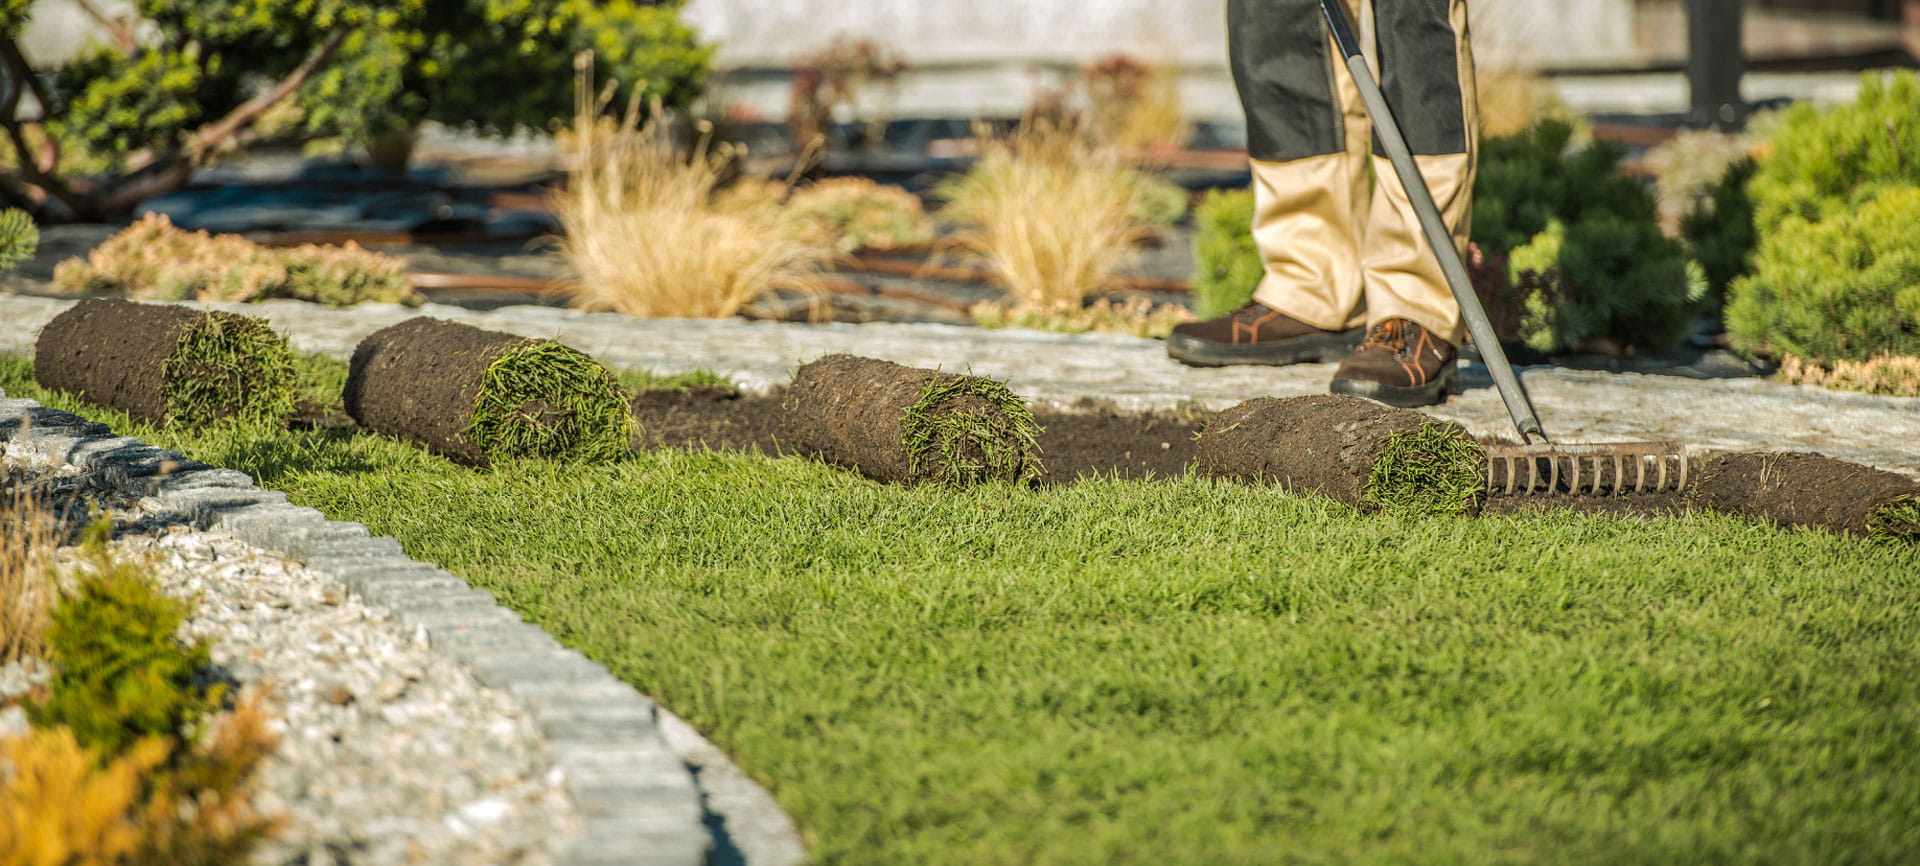 Is Gravel the Right Choice for Your Landscaping Project?